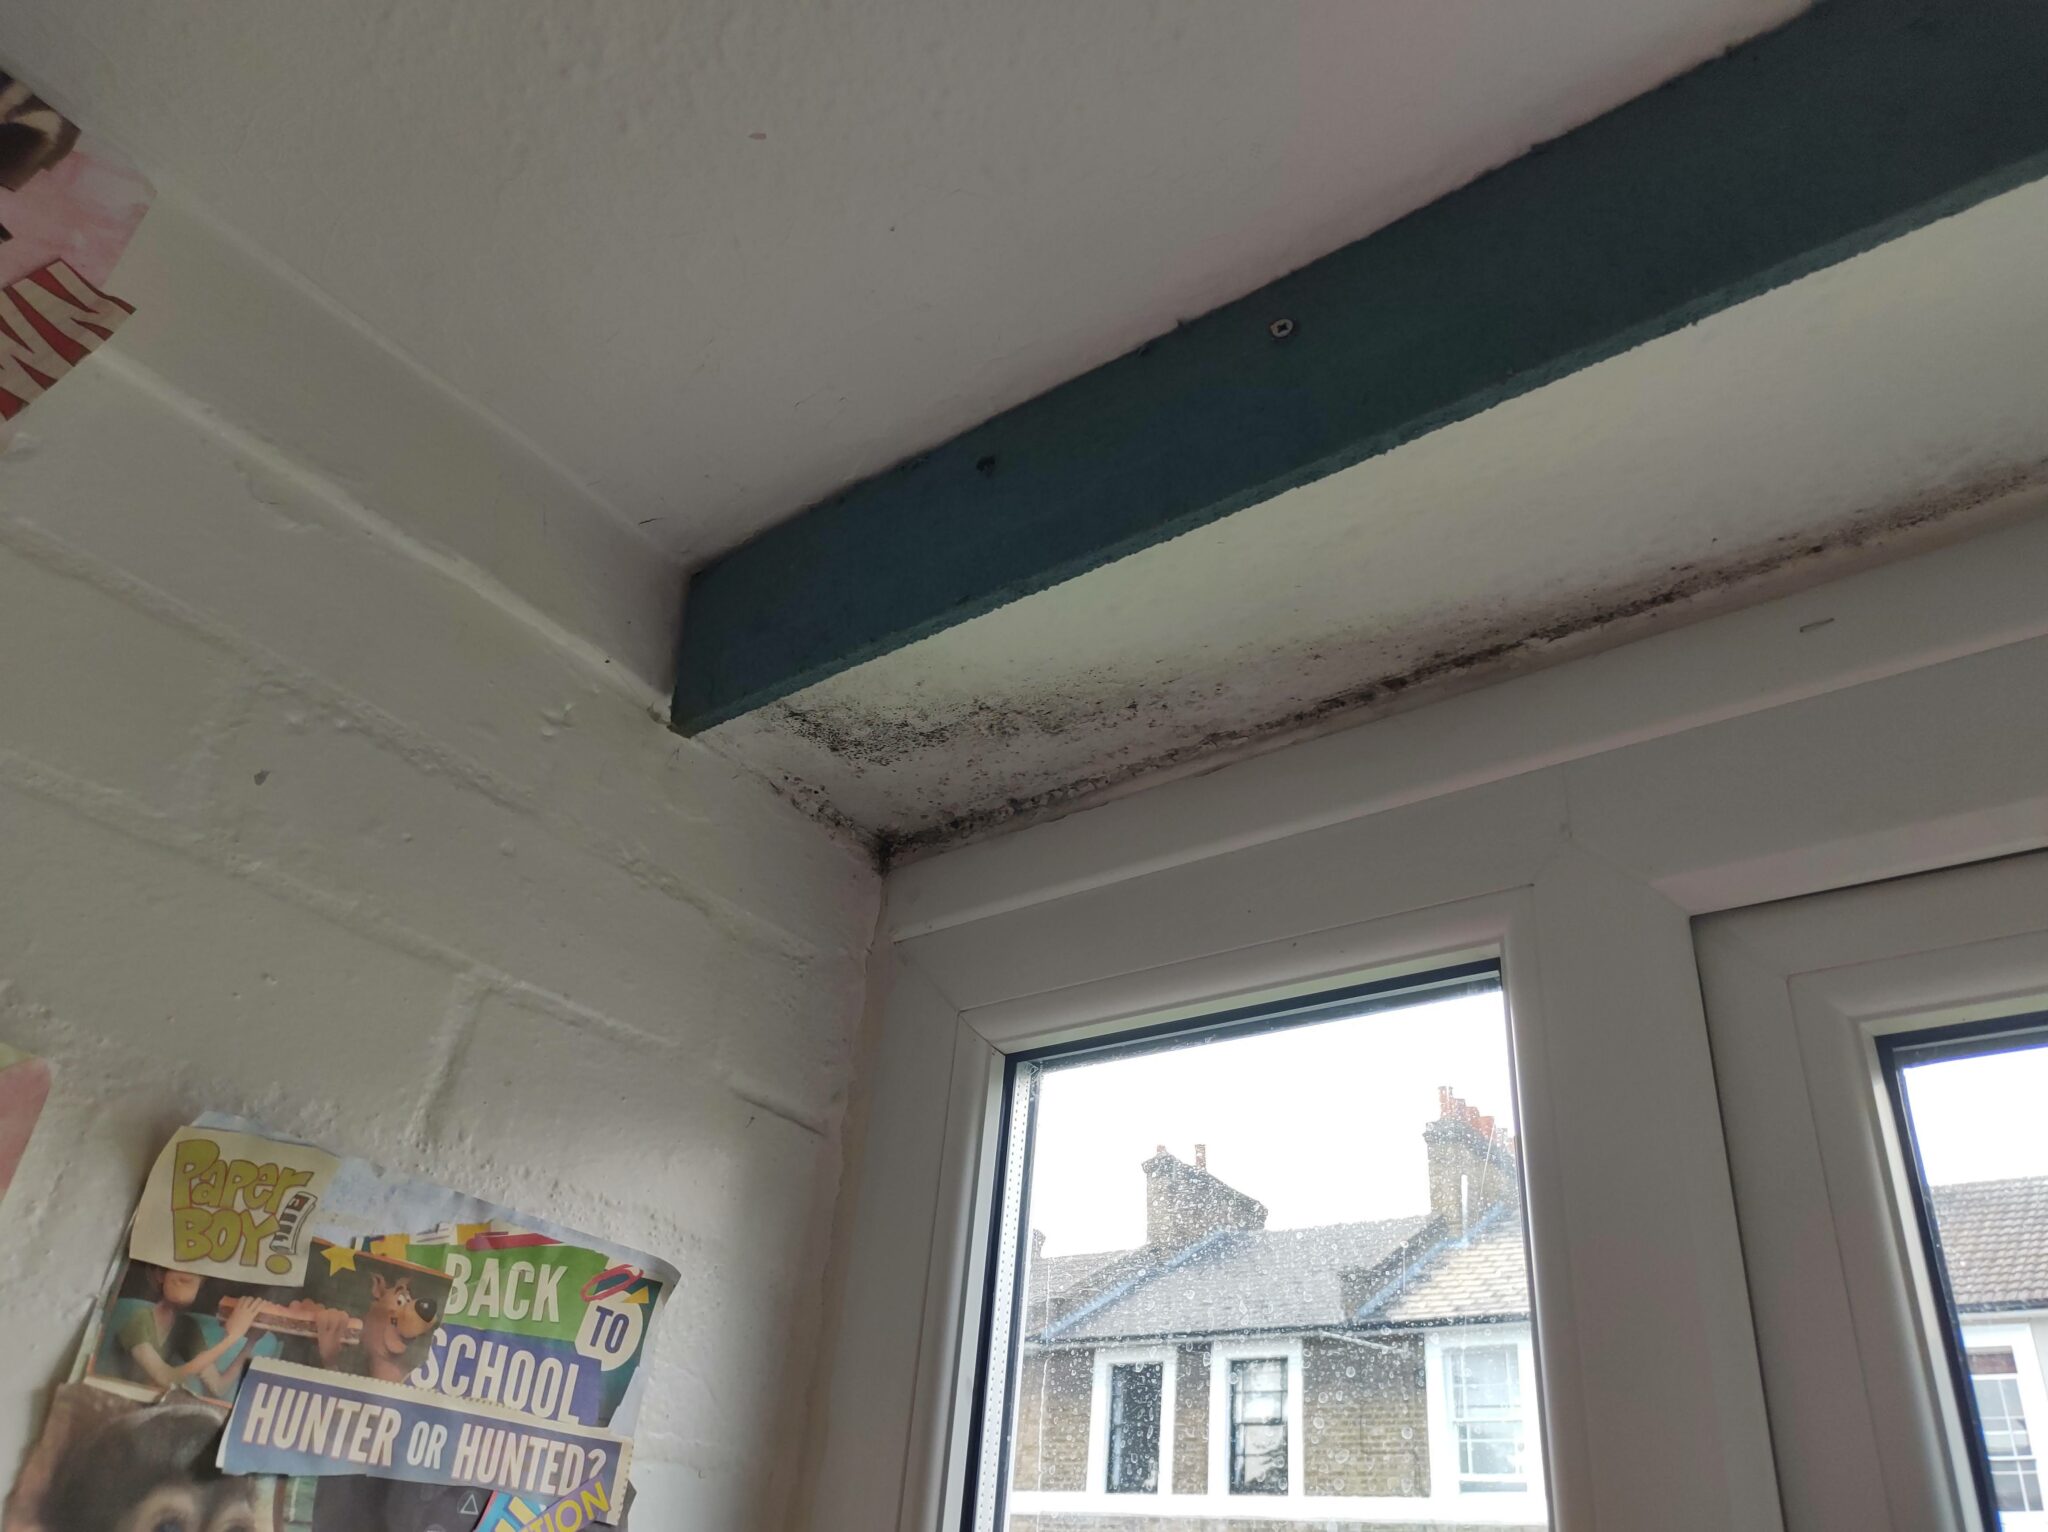 Mould in a classroom of a school near the window frame